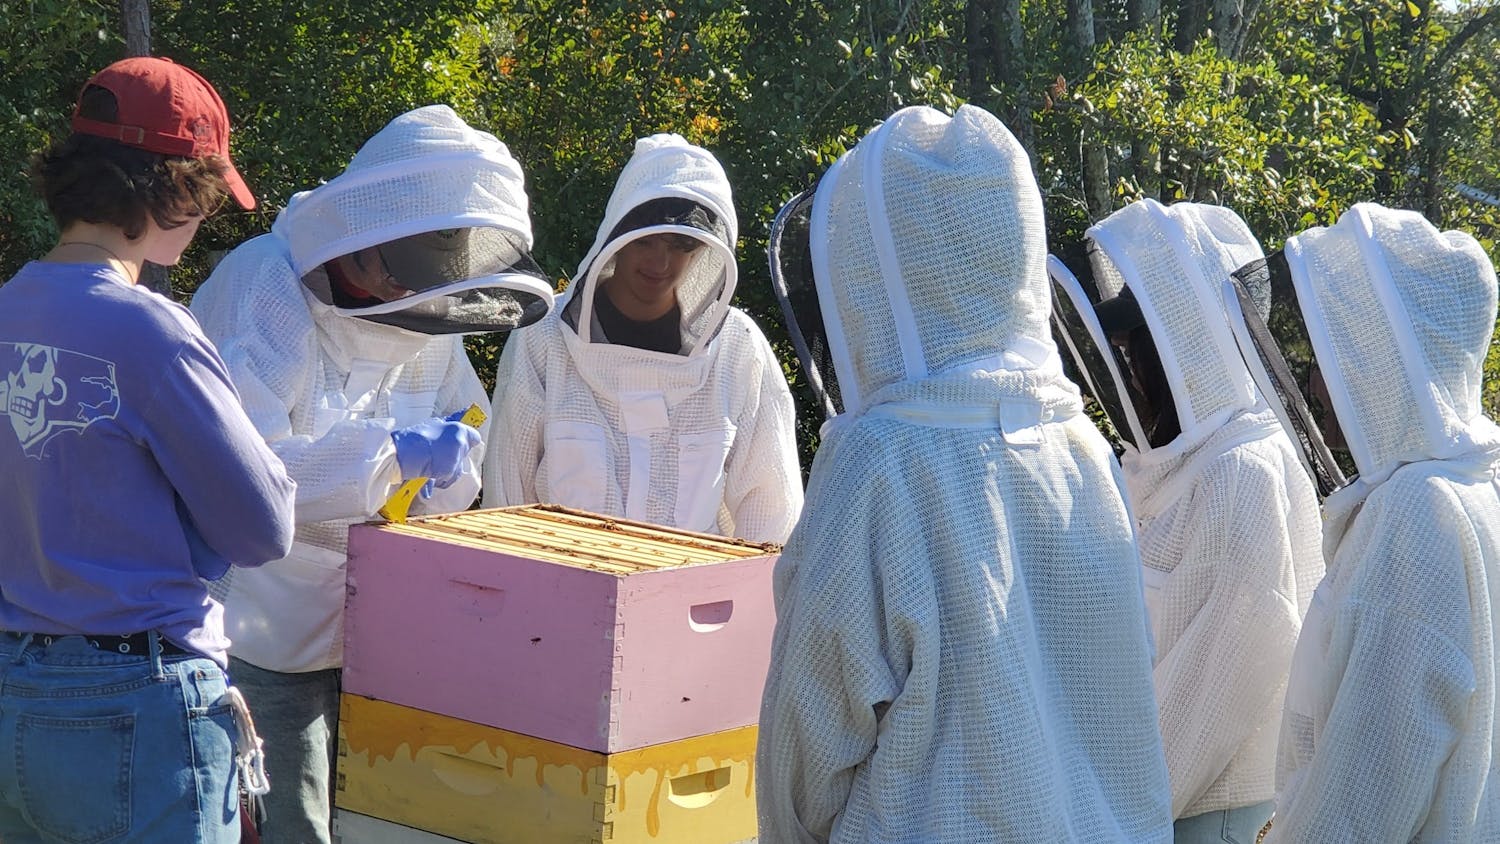 The Carolina Beekeeping Club crowd around beehives in their beesuits. The club is open to all USC students and faculty who share a passion for “protecting our pollinators.” 